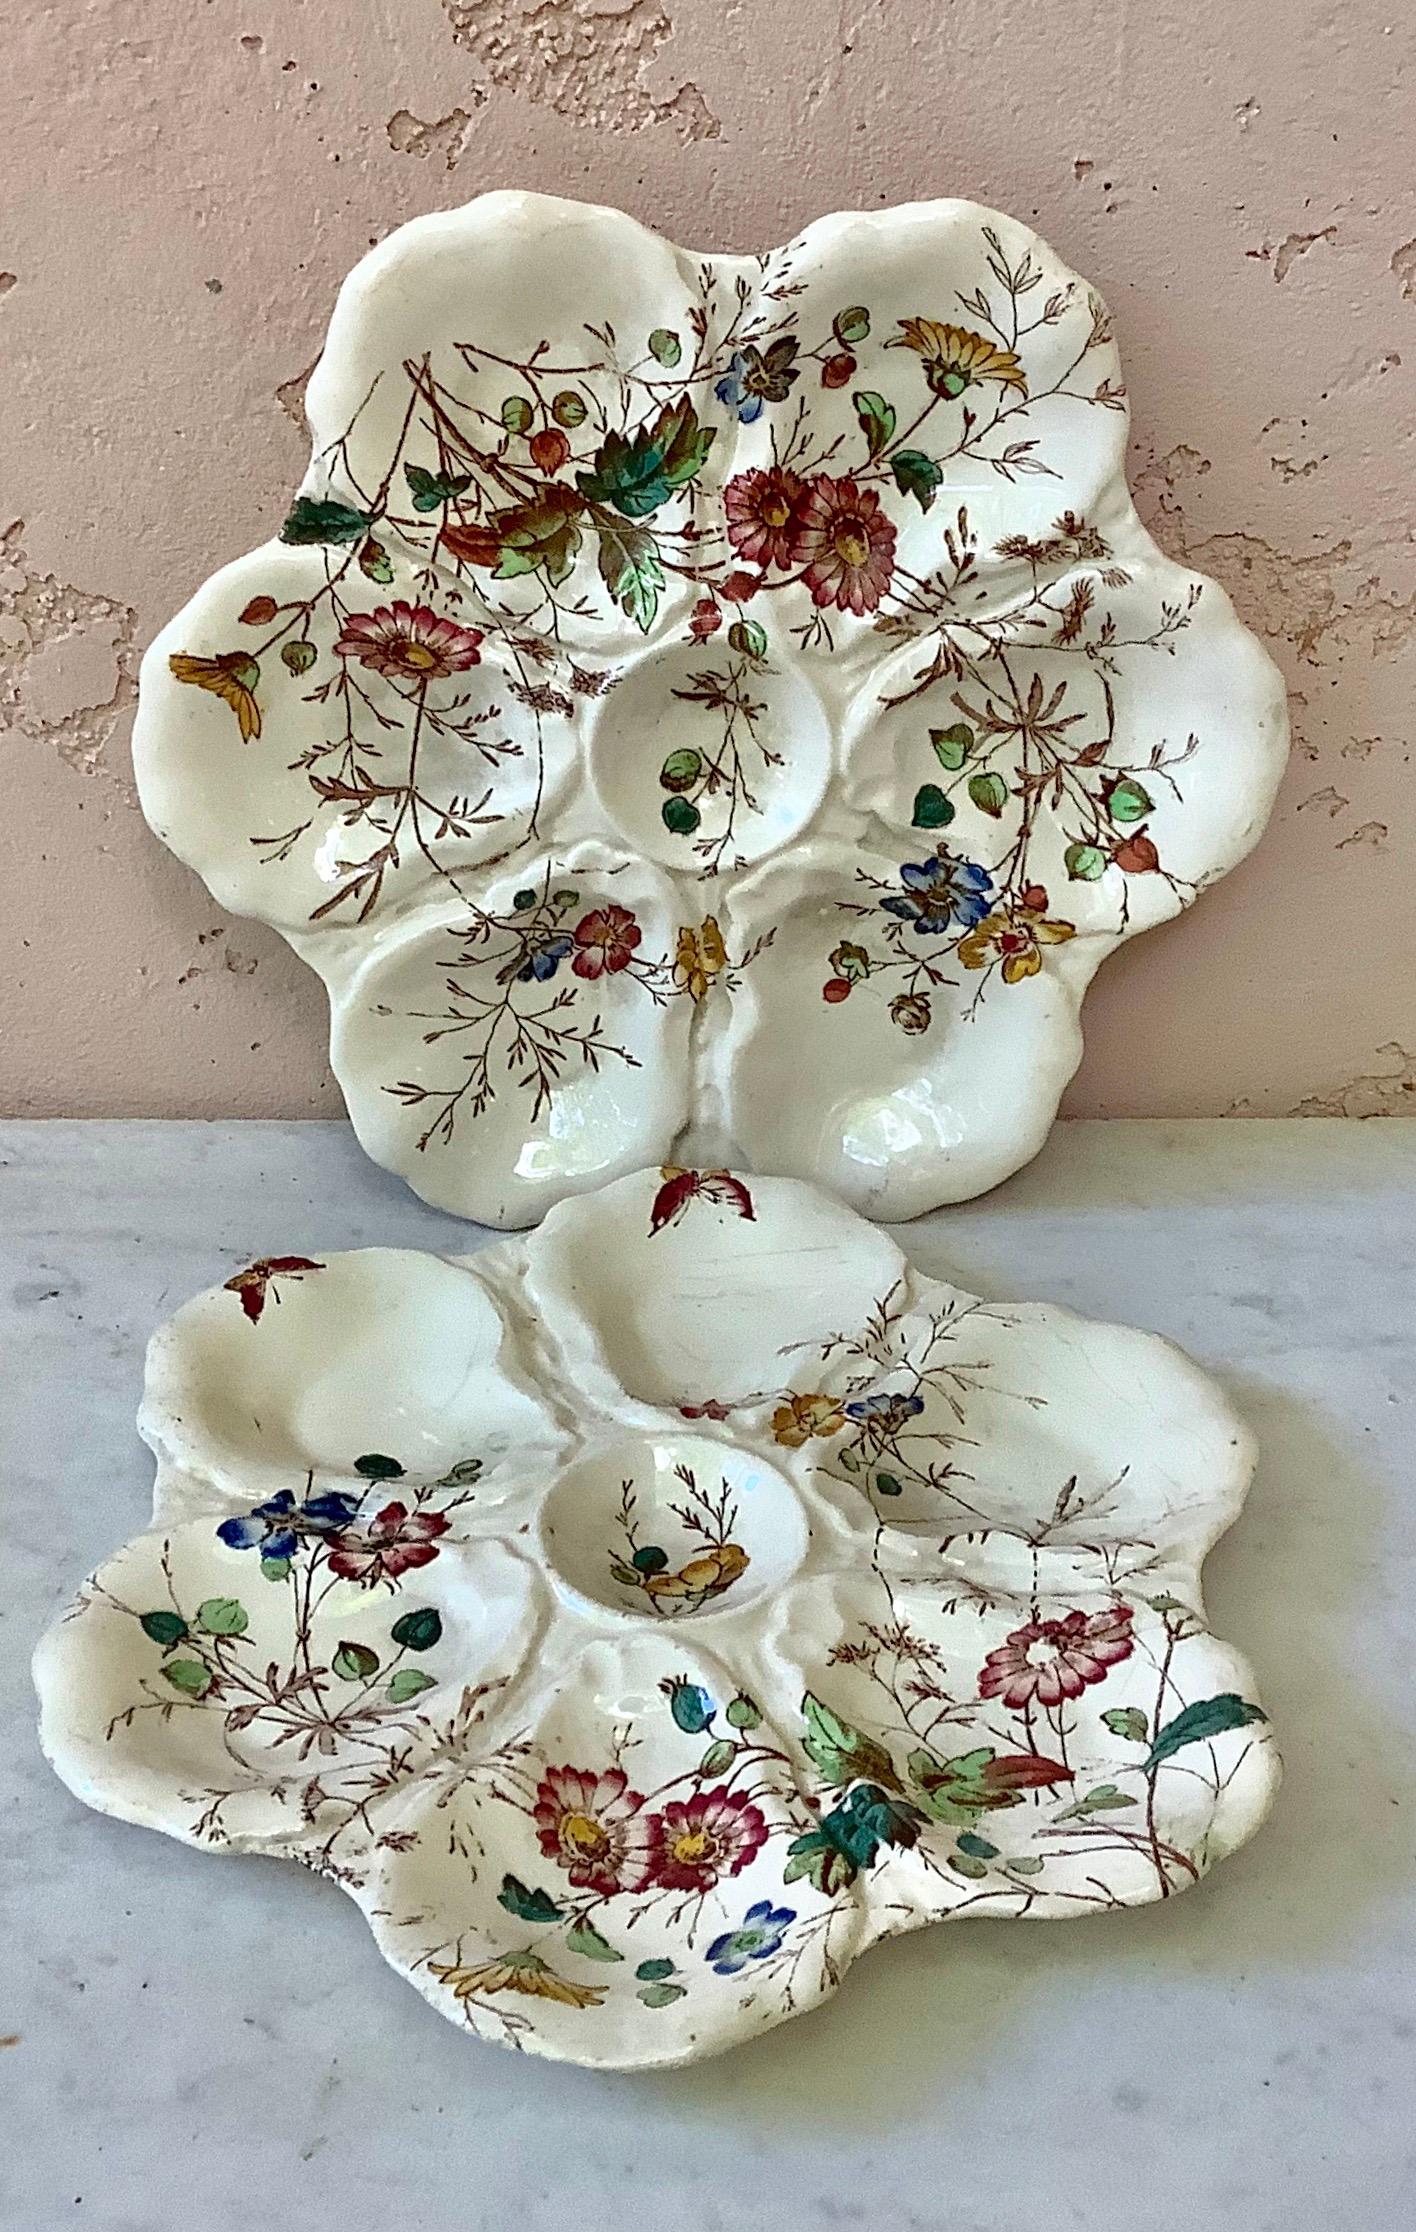 Ceramic 19th Century English Oyster Plate with Flowers